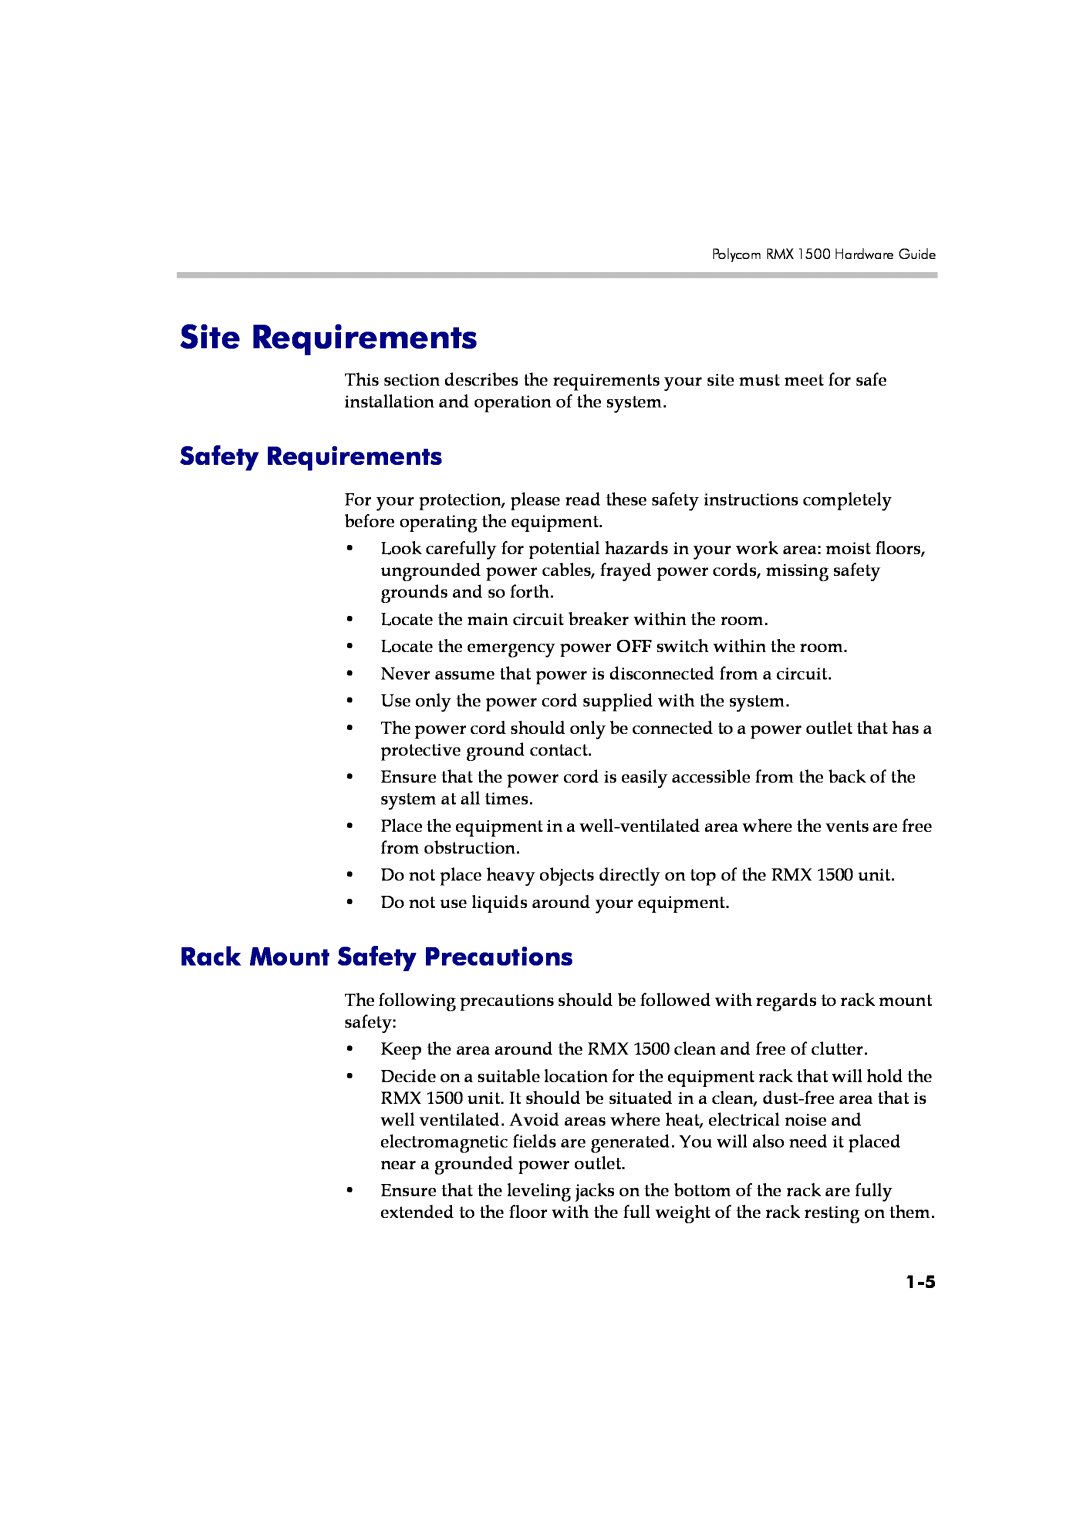 Polycom DOC2557A manual Site Requirements, Safety Requirements, Rack Mount Safety Precautions 